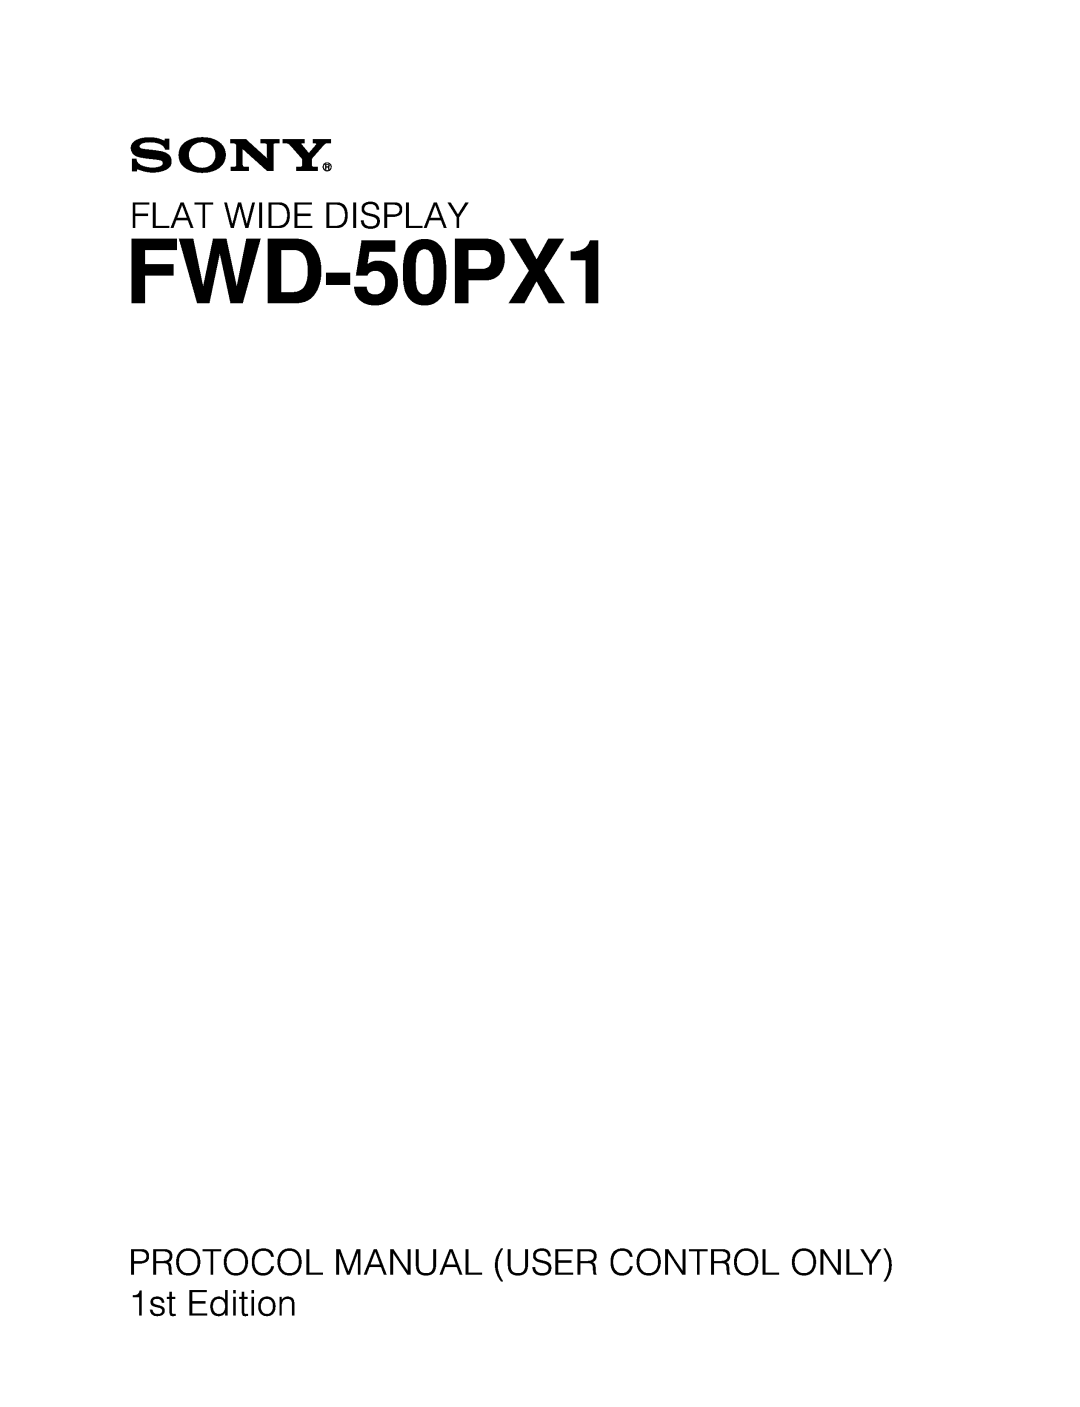 Sony FWD-50PX1 manual Flat Wide Display, PROTOCOL MANUAL USER CONTROL ONLY 1st Edition 